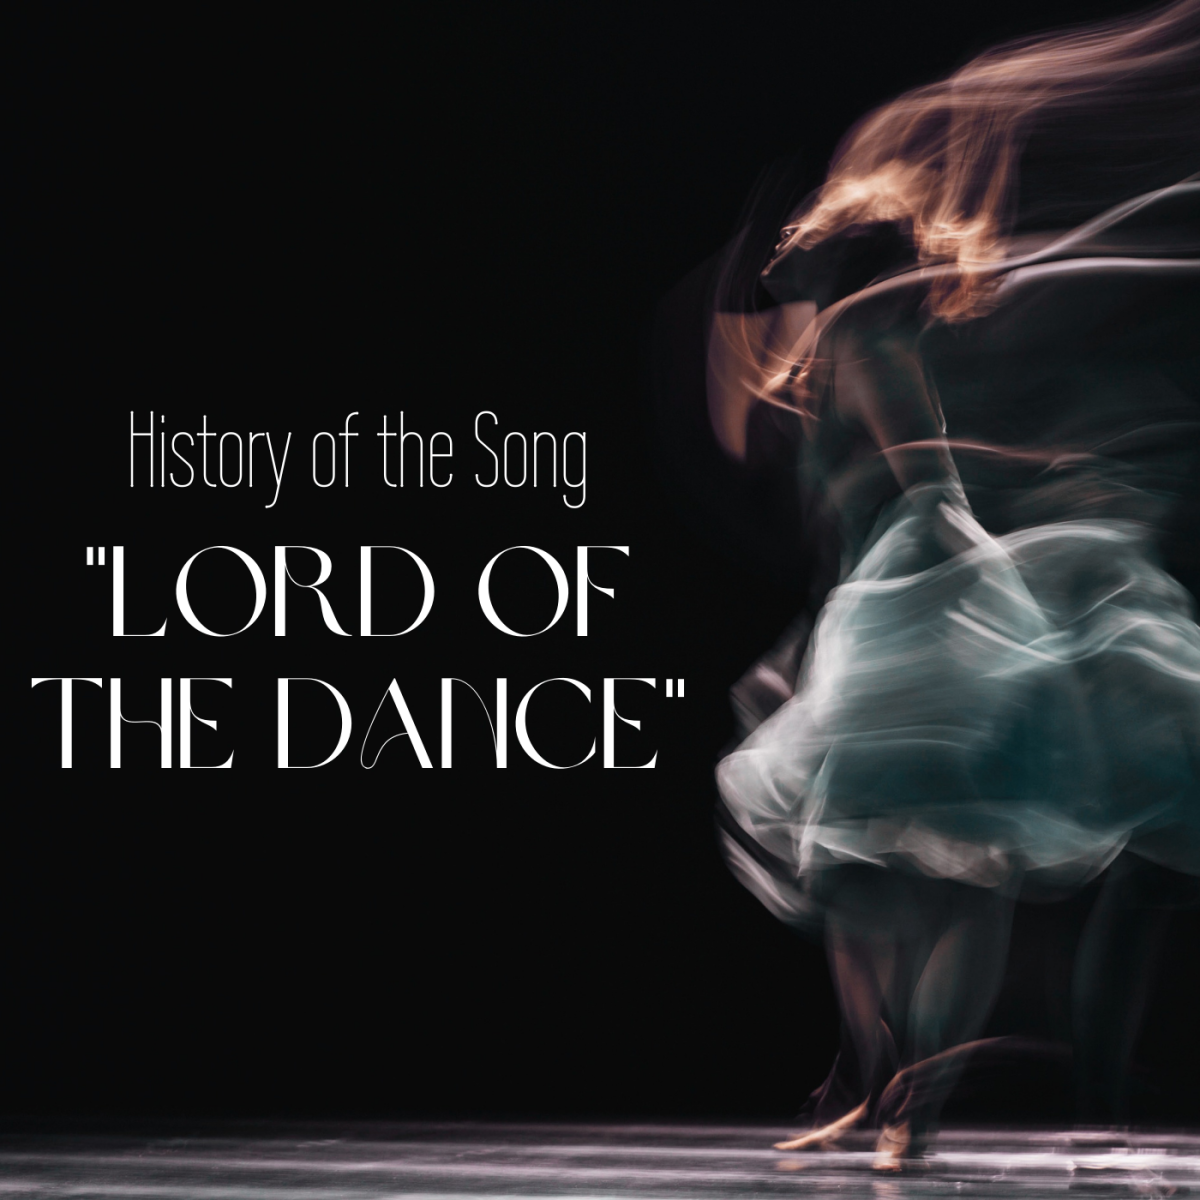 Learn how the song "Lord of the Dance" emerged from the hymn "Simple Gifts."